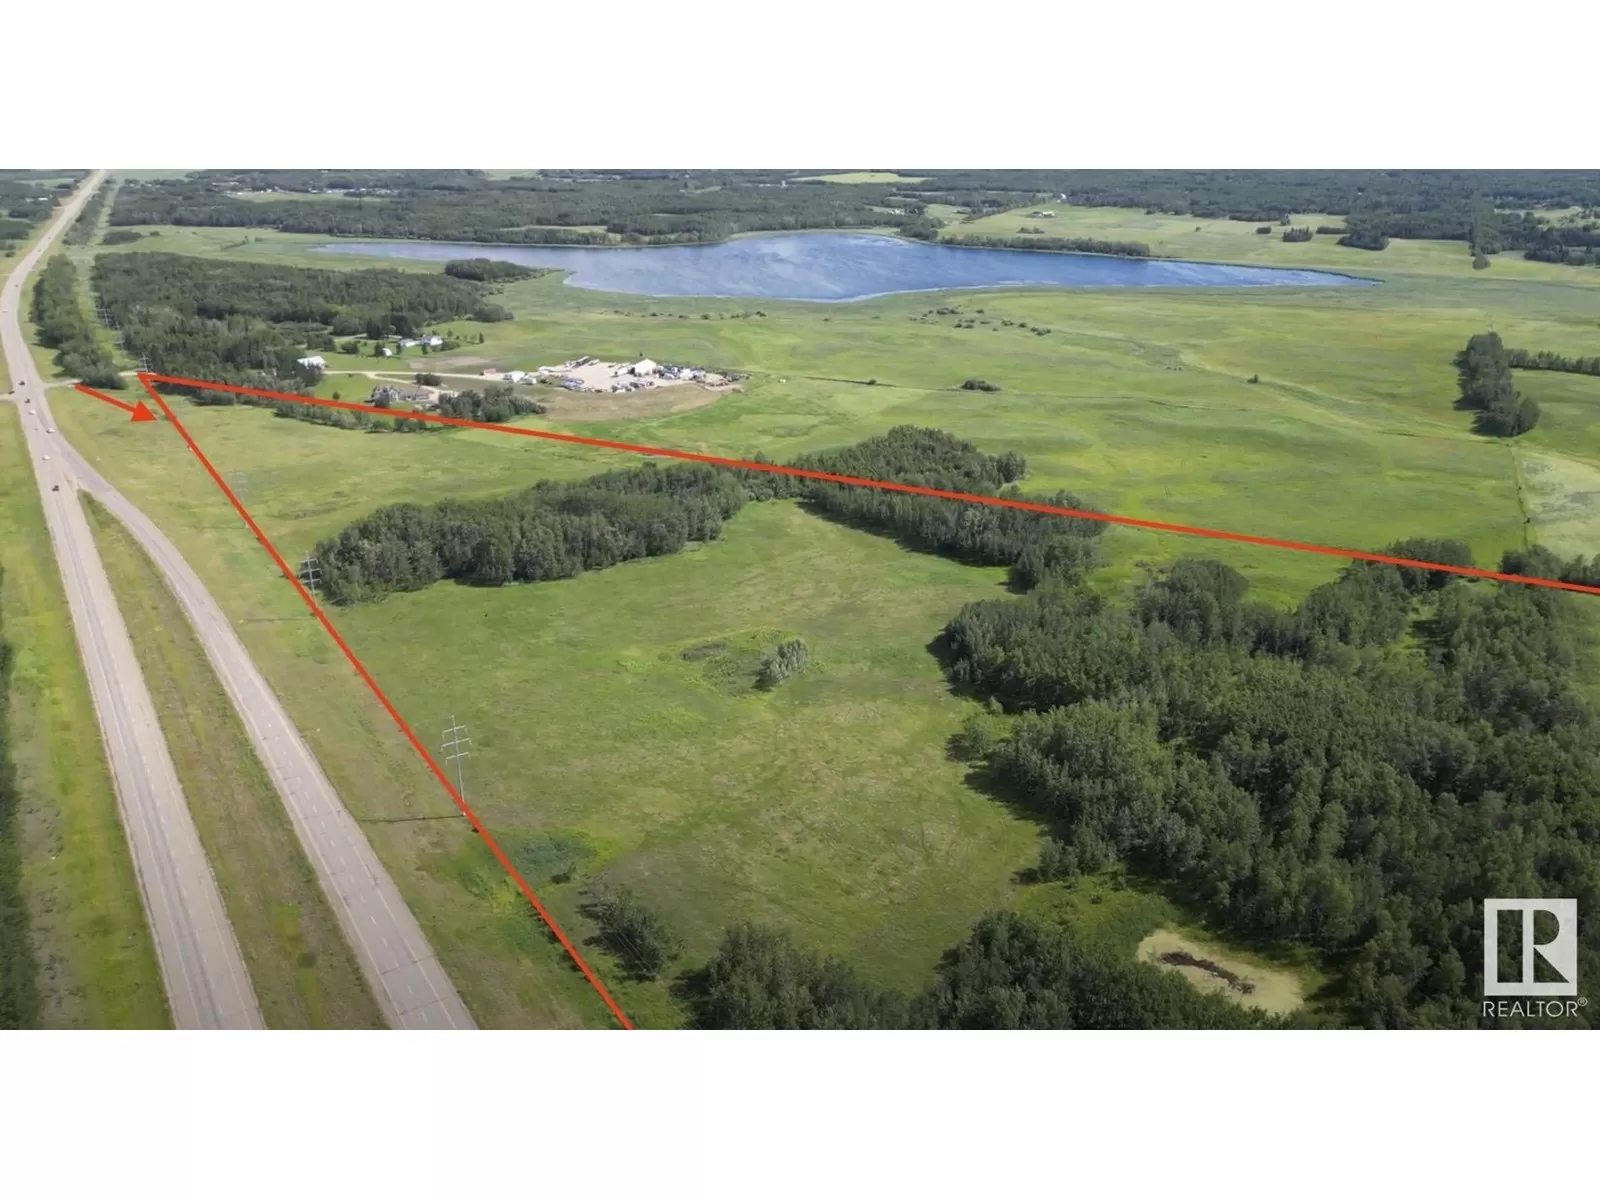 No Building for rent: Rr 222 Highway 14, Rural Strathcona County, Alberta T8B 3C9